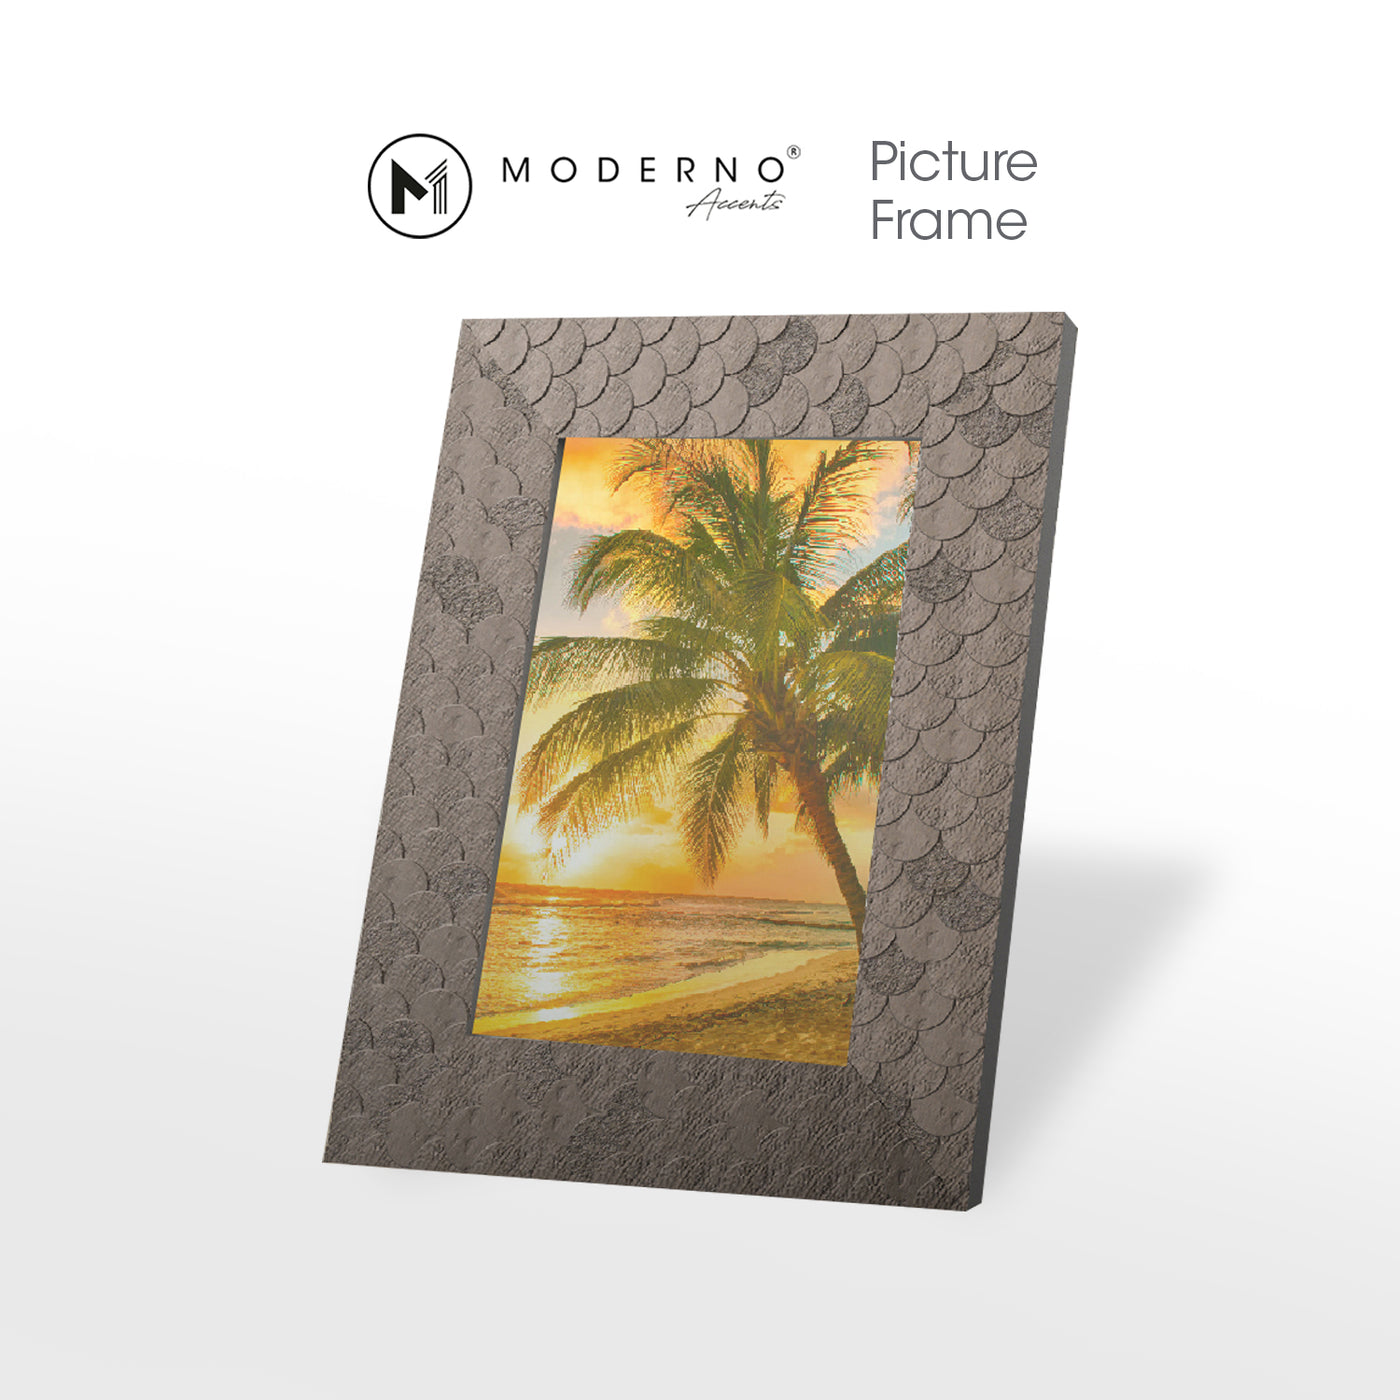 MODERNO Single Picture Frame - Scale Photo Frame